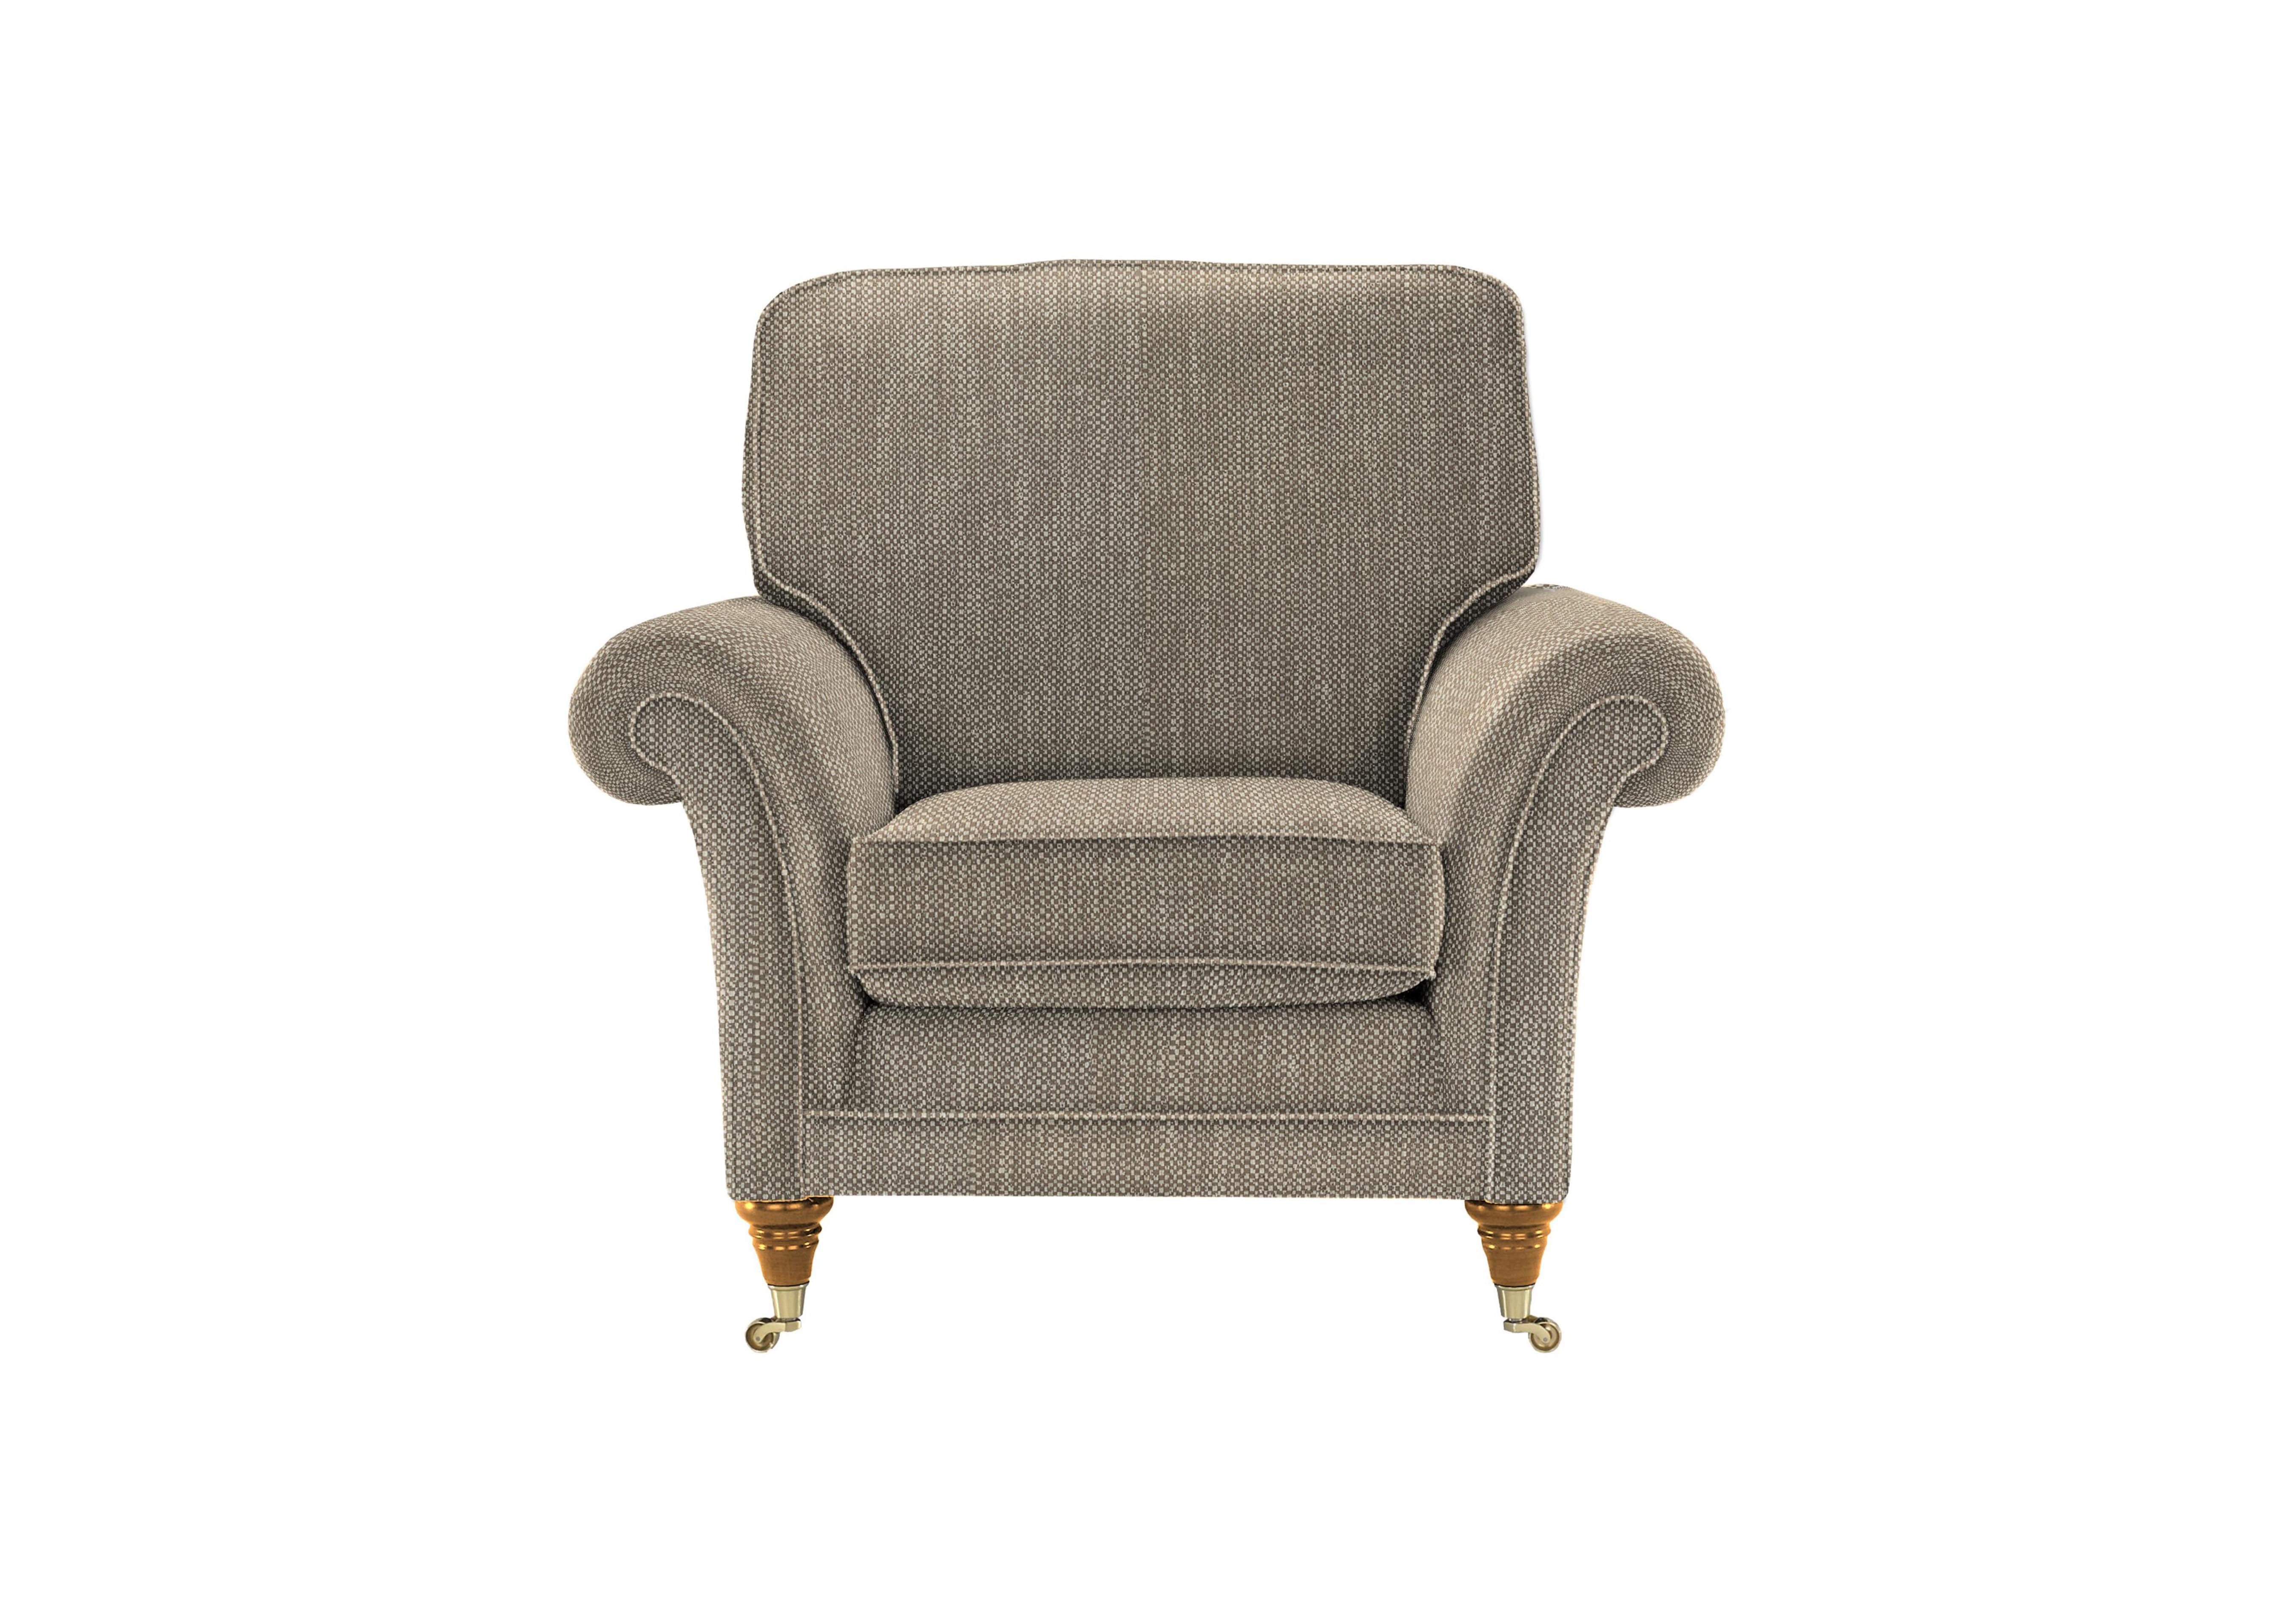 Burghley Fabric Armchair in 001477-0025 Metric Sable on Furniture Village